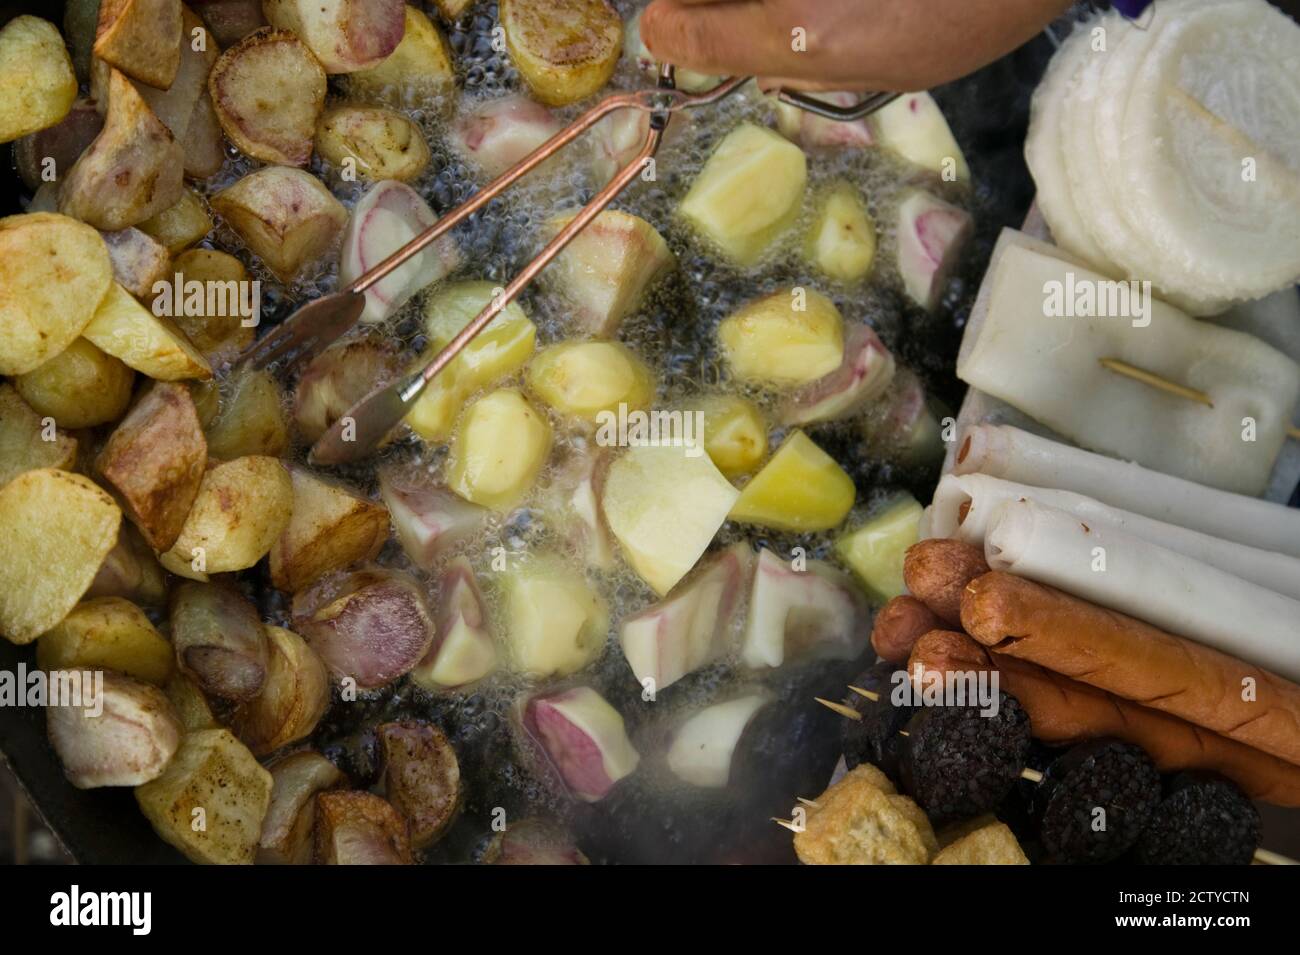 Fried potatoes and snacks on the grill in a street market, Old Town, Lijiang, Yunnan Province, China Stock Photo